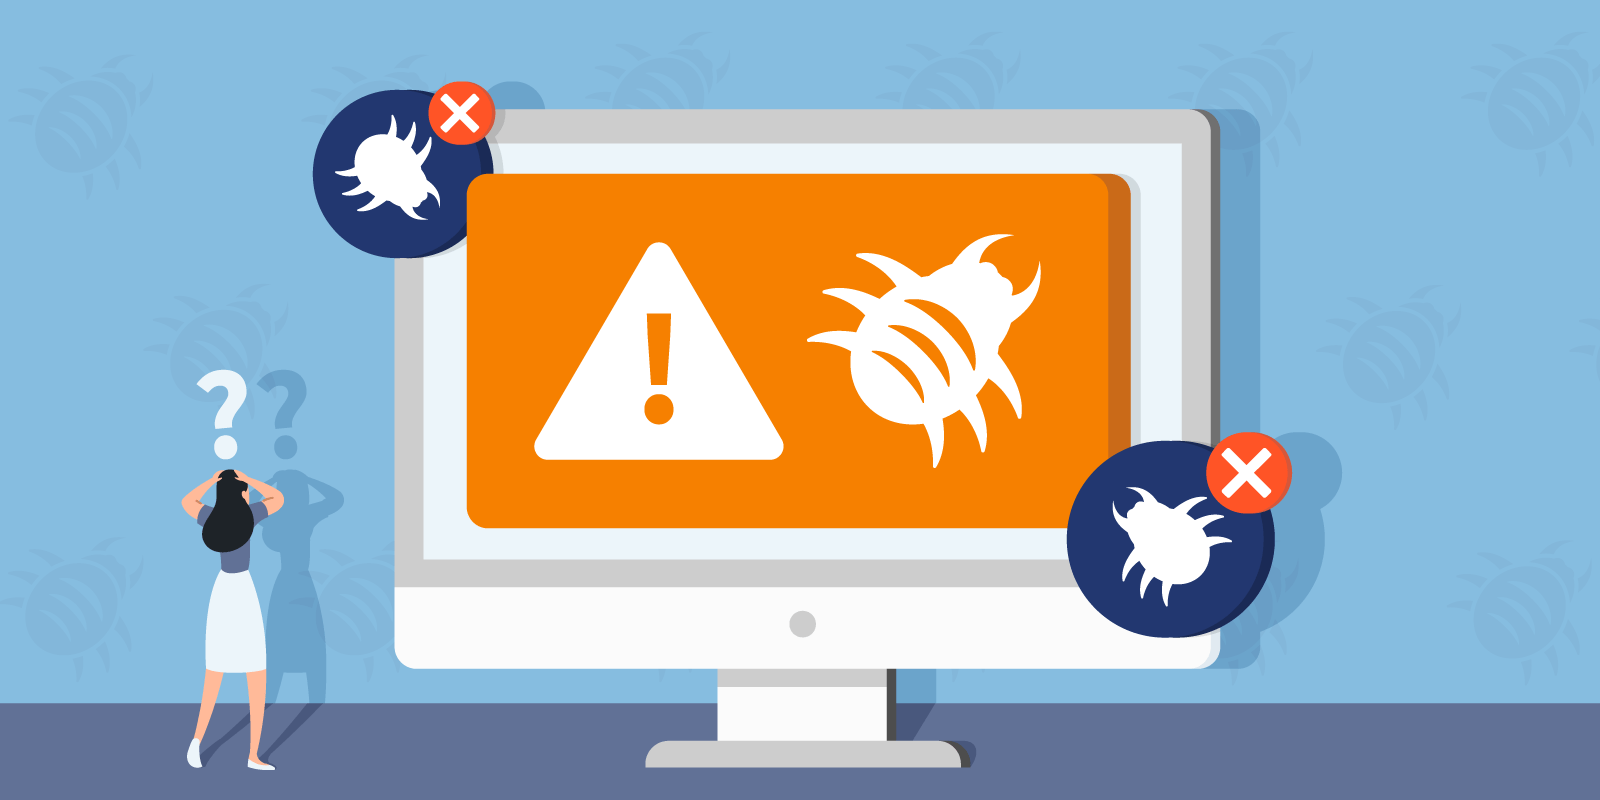 Use a reliable antivirus program to scan your computer for any potential malware or viruses.
If any threats are detected, follow the recommended actions provided by the antivirus software to remove them.